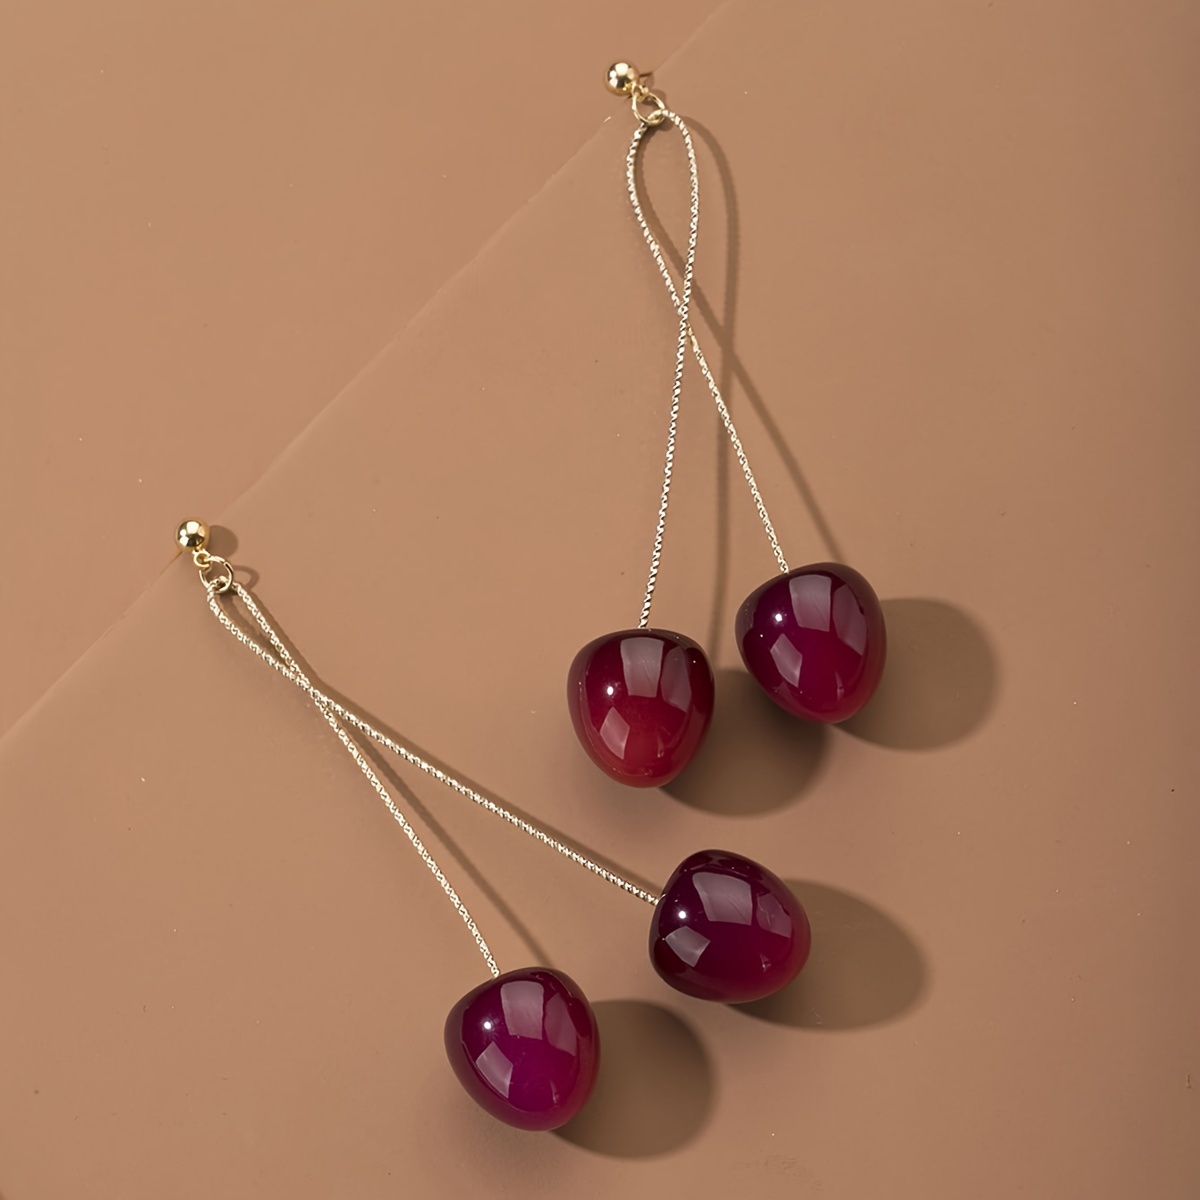 

Lovely Cherry Decorative Earrings Cute Ears Decoration Stylish Accessories For Women Daily Wear